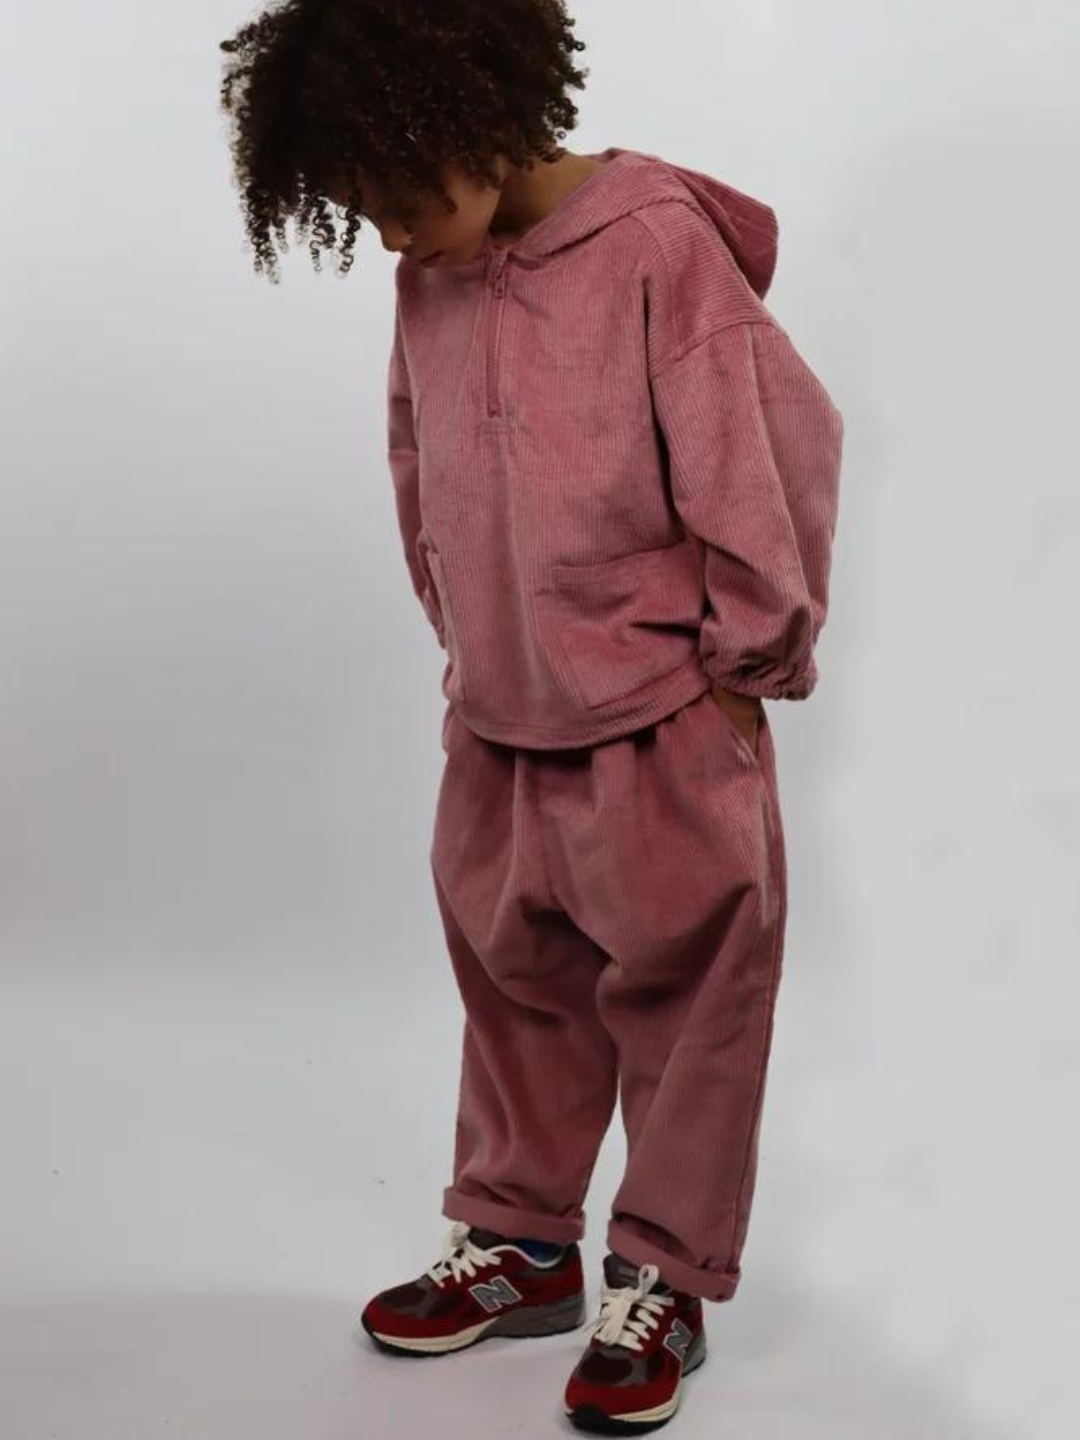 Child wearing dusty pink kids' hooded smock and pants